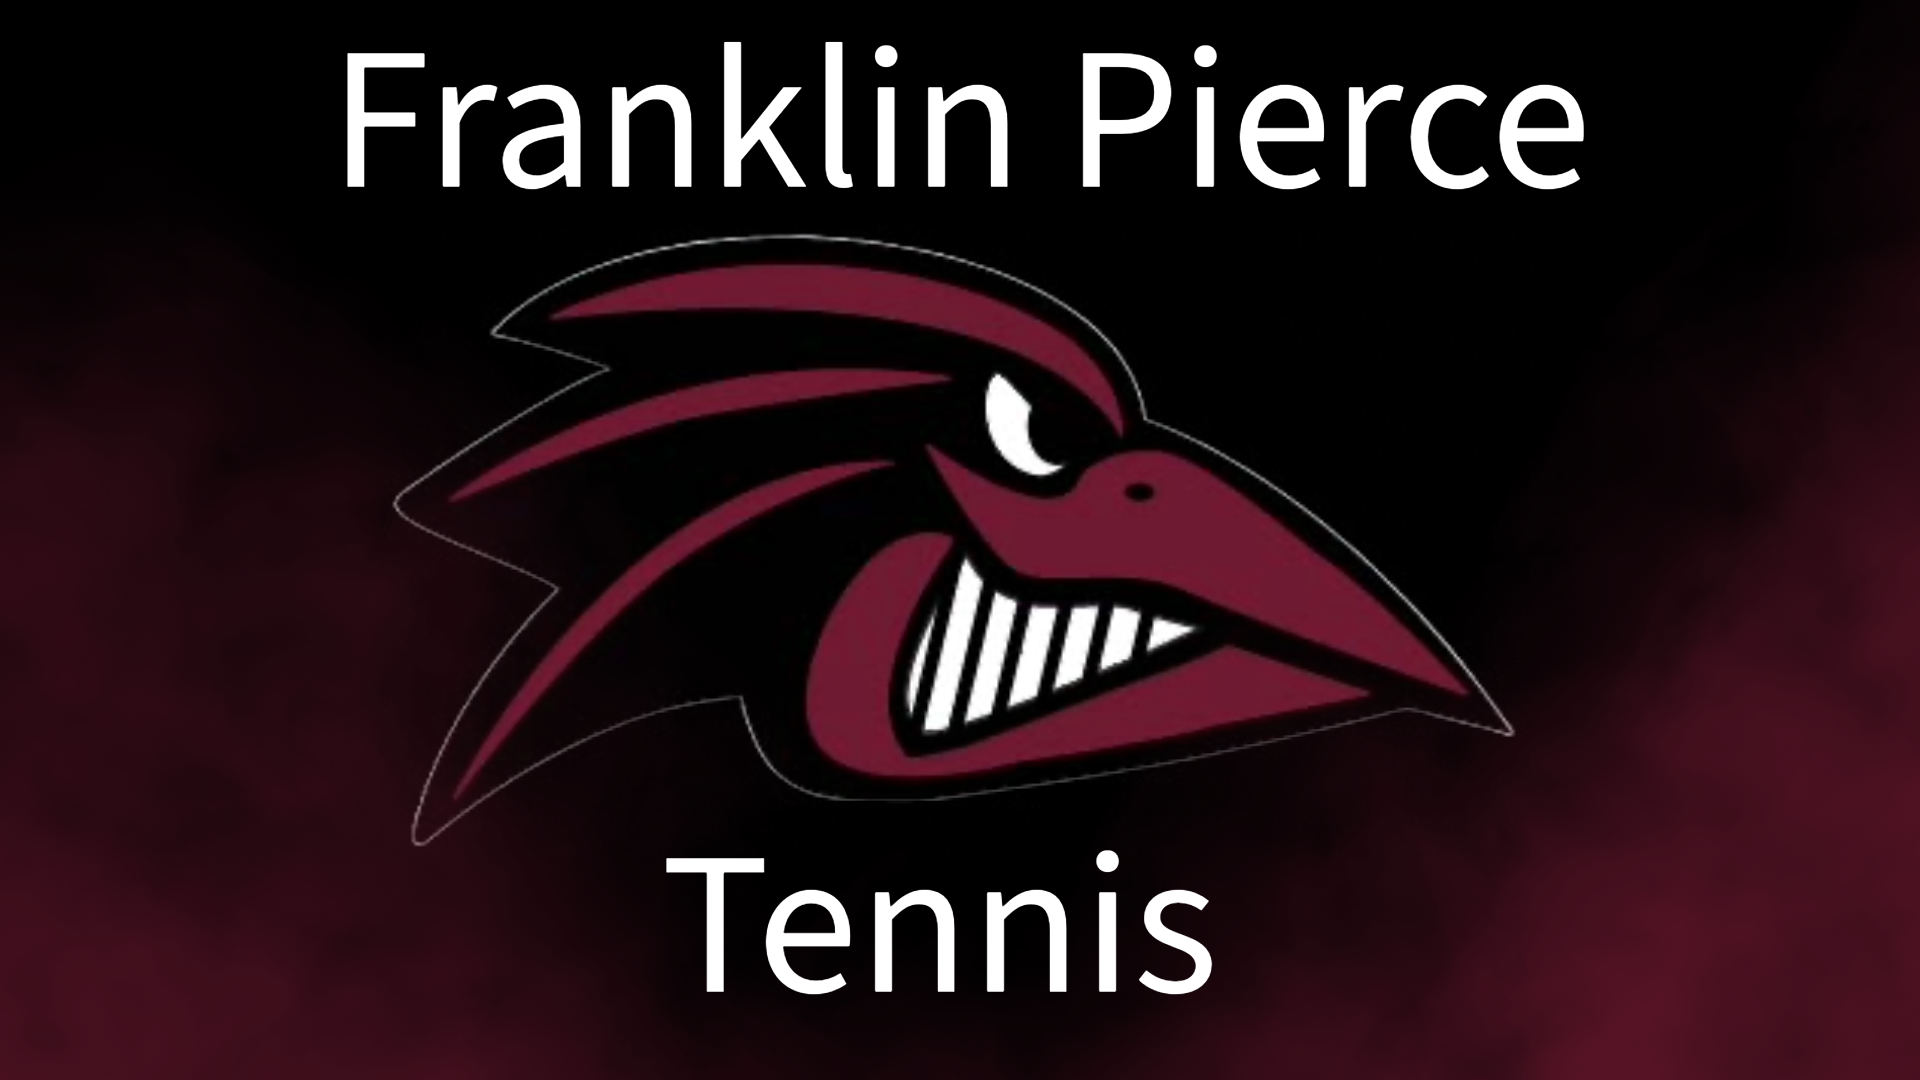 Franklin Pierce tennis falls flat in first week of competition